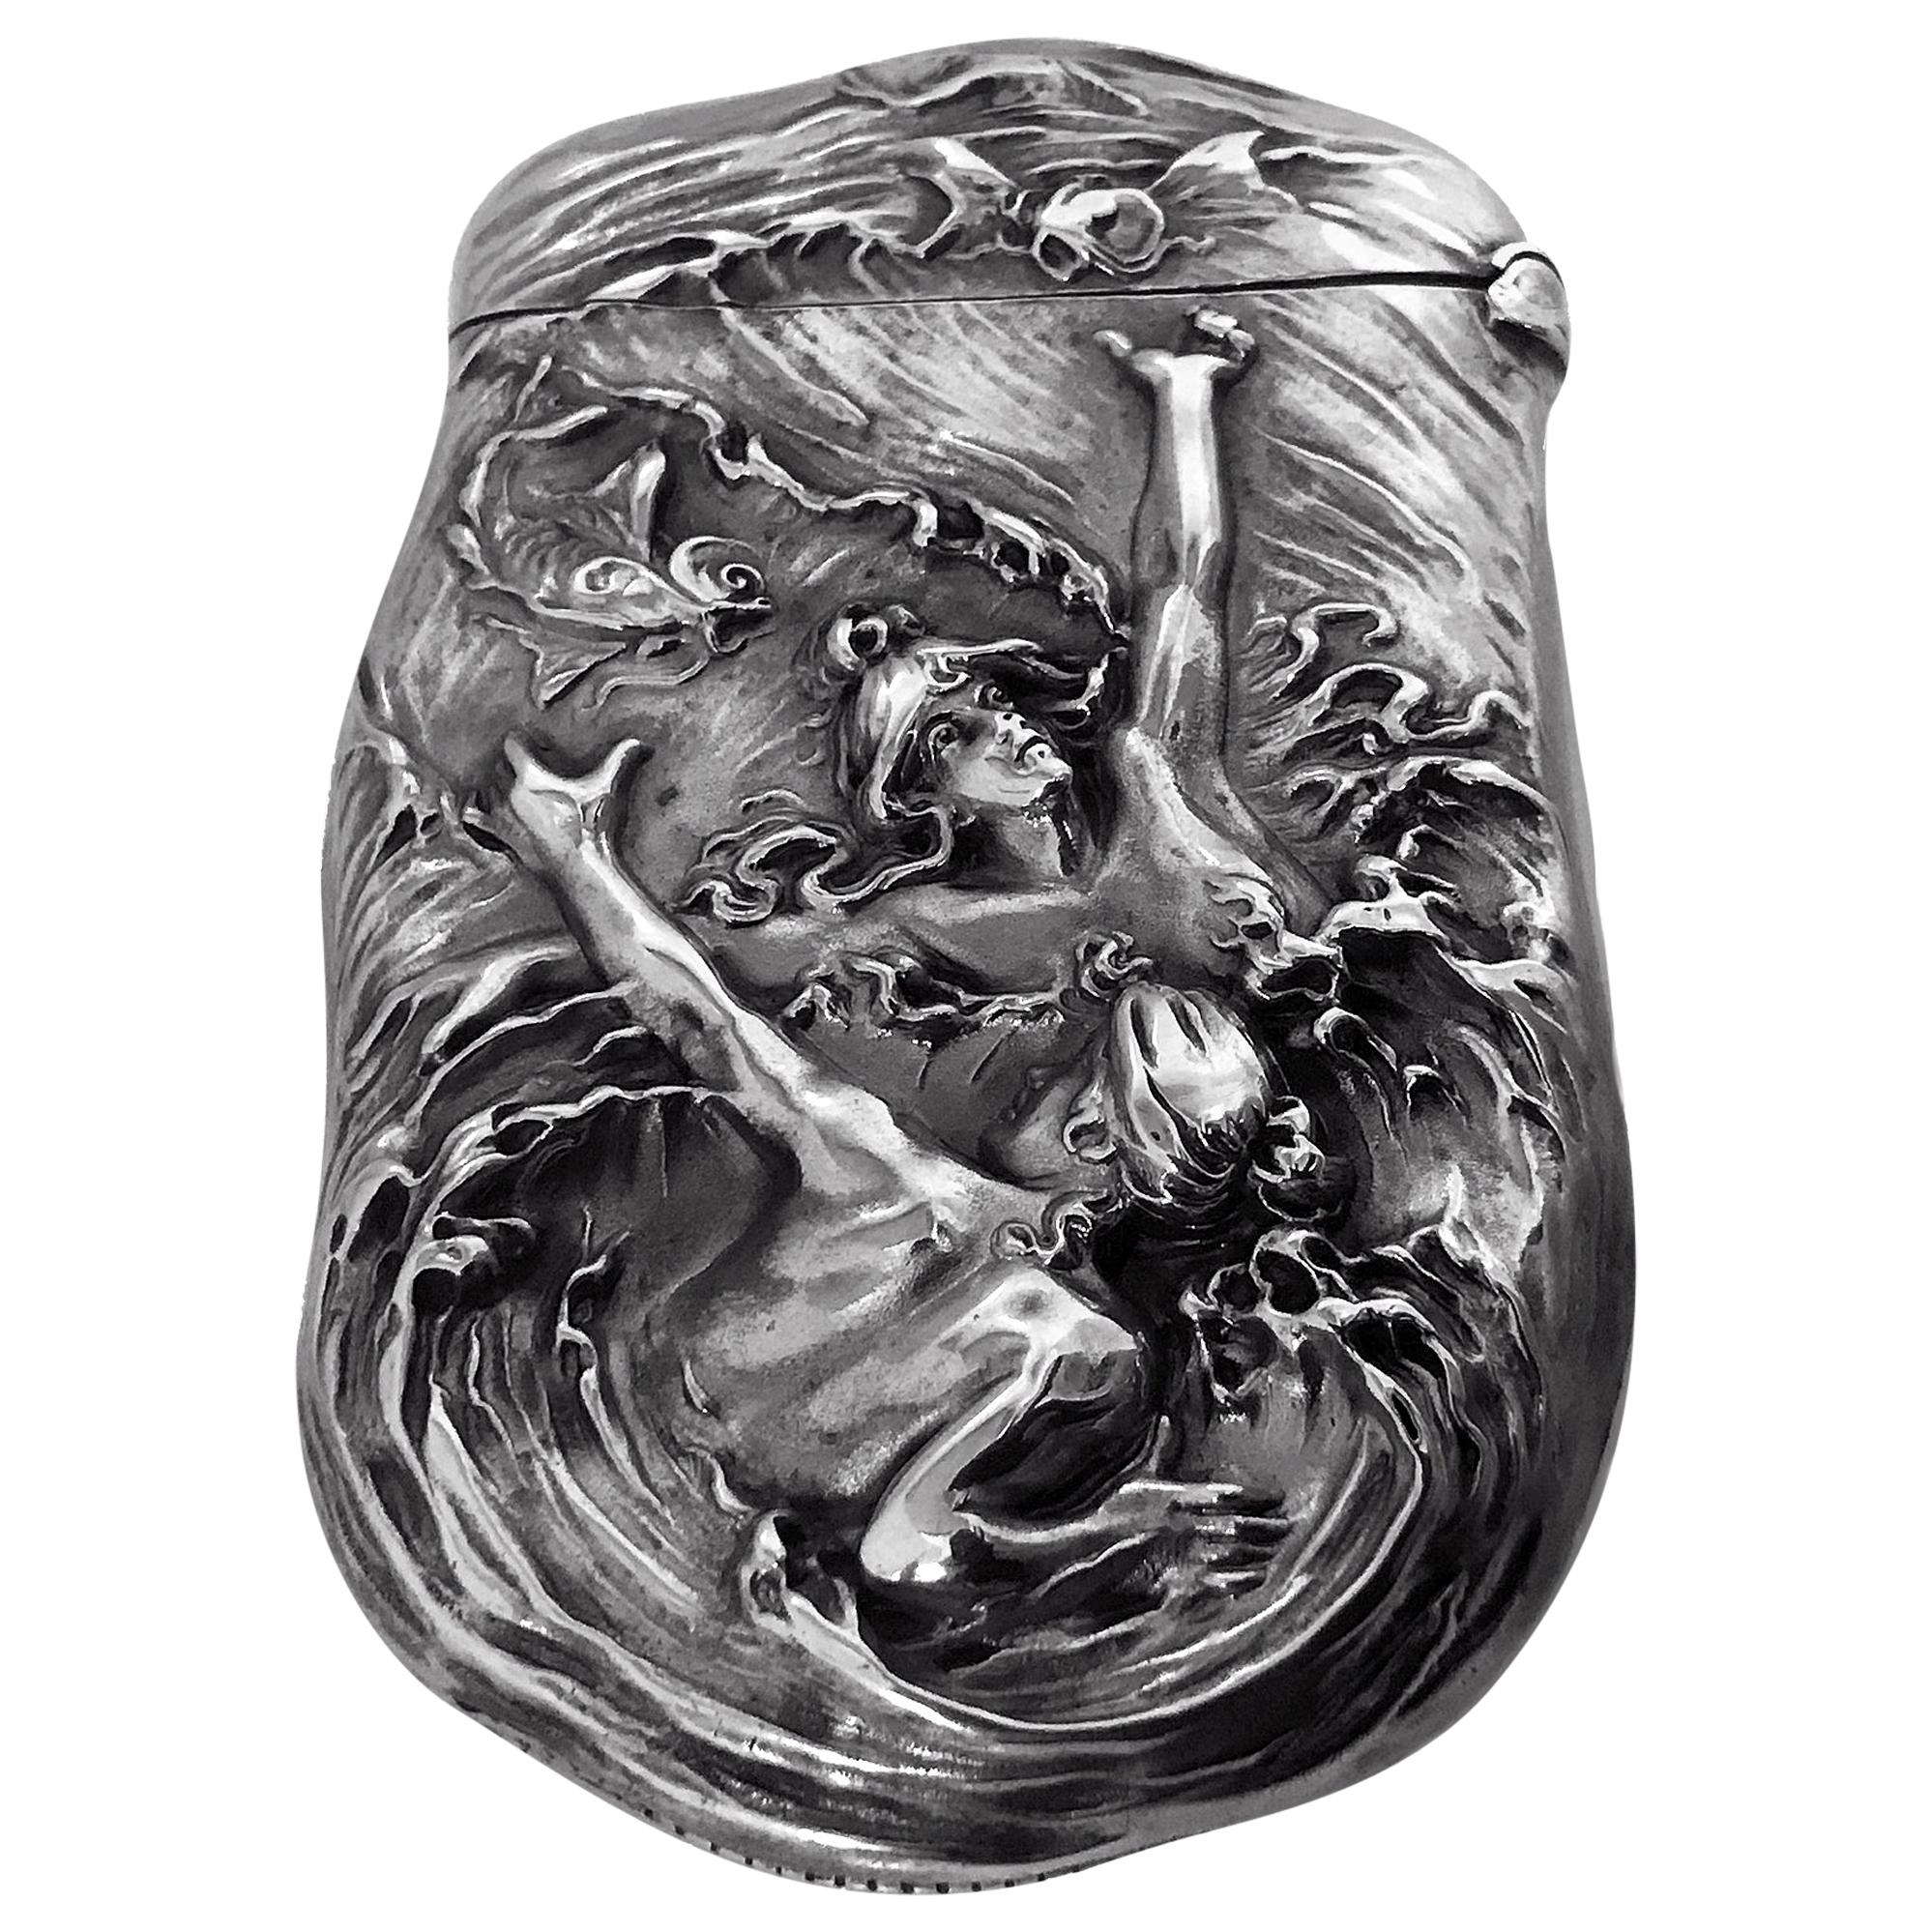 MERMAID DESIGN WITH ETCHING STERLING SILVER MATCH SAFE/ VESTA NEW 